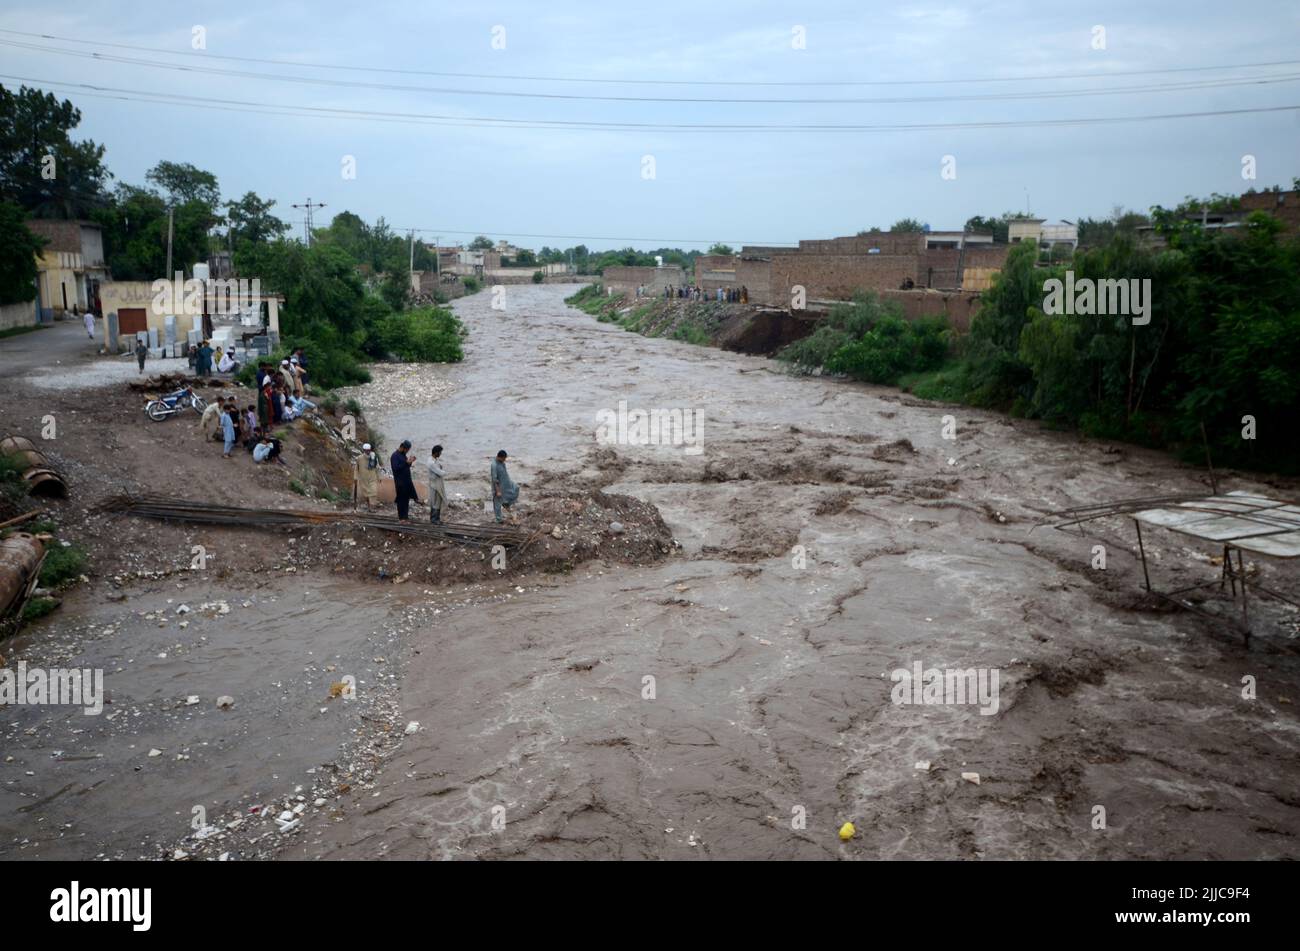 Peshawar, Pakistan, 24/07/2022, Flood in Mathura Shagai Hindkian Wazir Qila area of Peshawar since seven o'clock in the morning. Safety dams were to be built at several places under the Act, but due to the continuous increase in floods, the safety dams at three places have also been washed away. The administration has already opened the spills of Varsik Dam, while on the other hand, in Afghanistan and tribal areas. Due to continuous rain since last year, the water has diverted to the mentioned areas for which emergency measures are required. (Photo by Hussain Ali/Pacific Press) Stock Photo